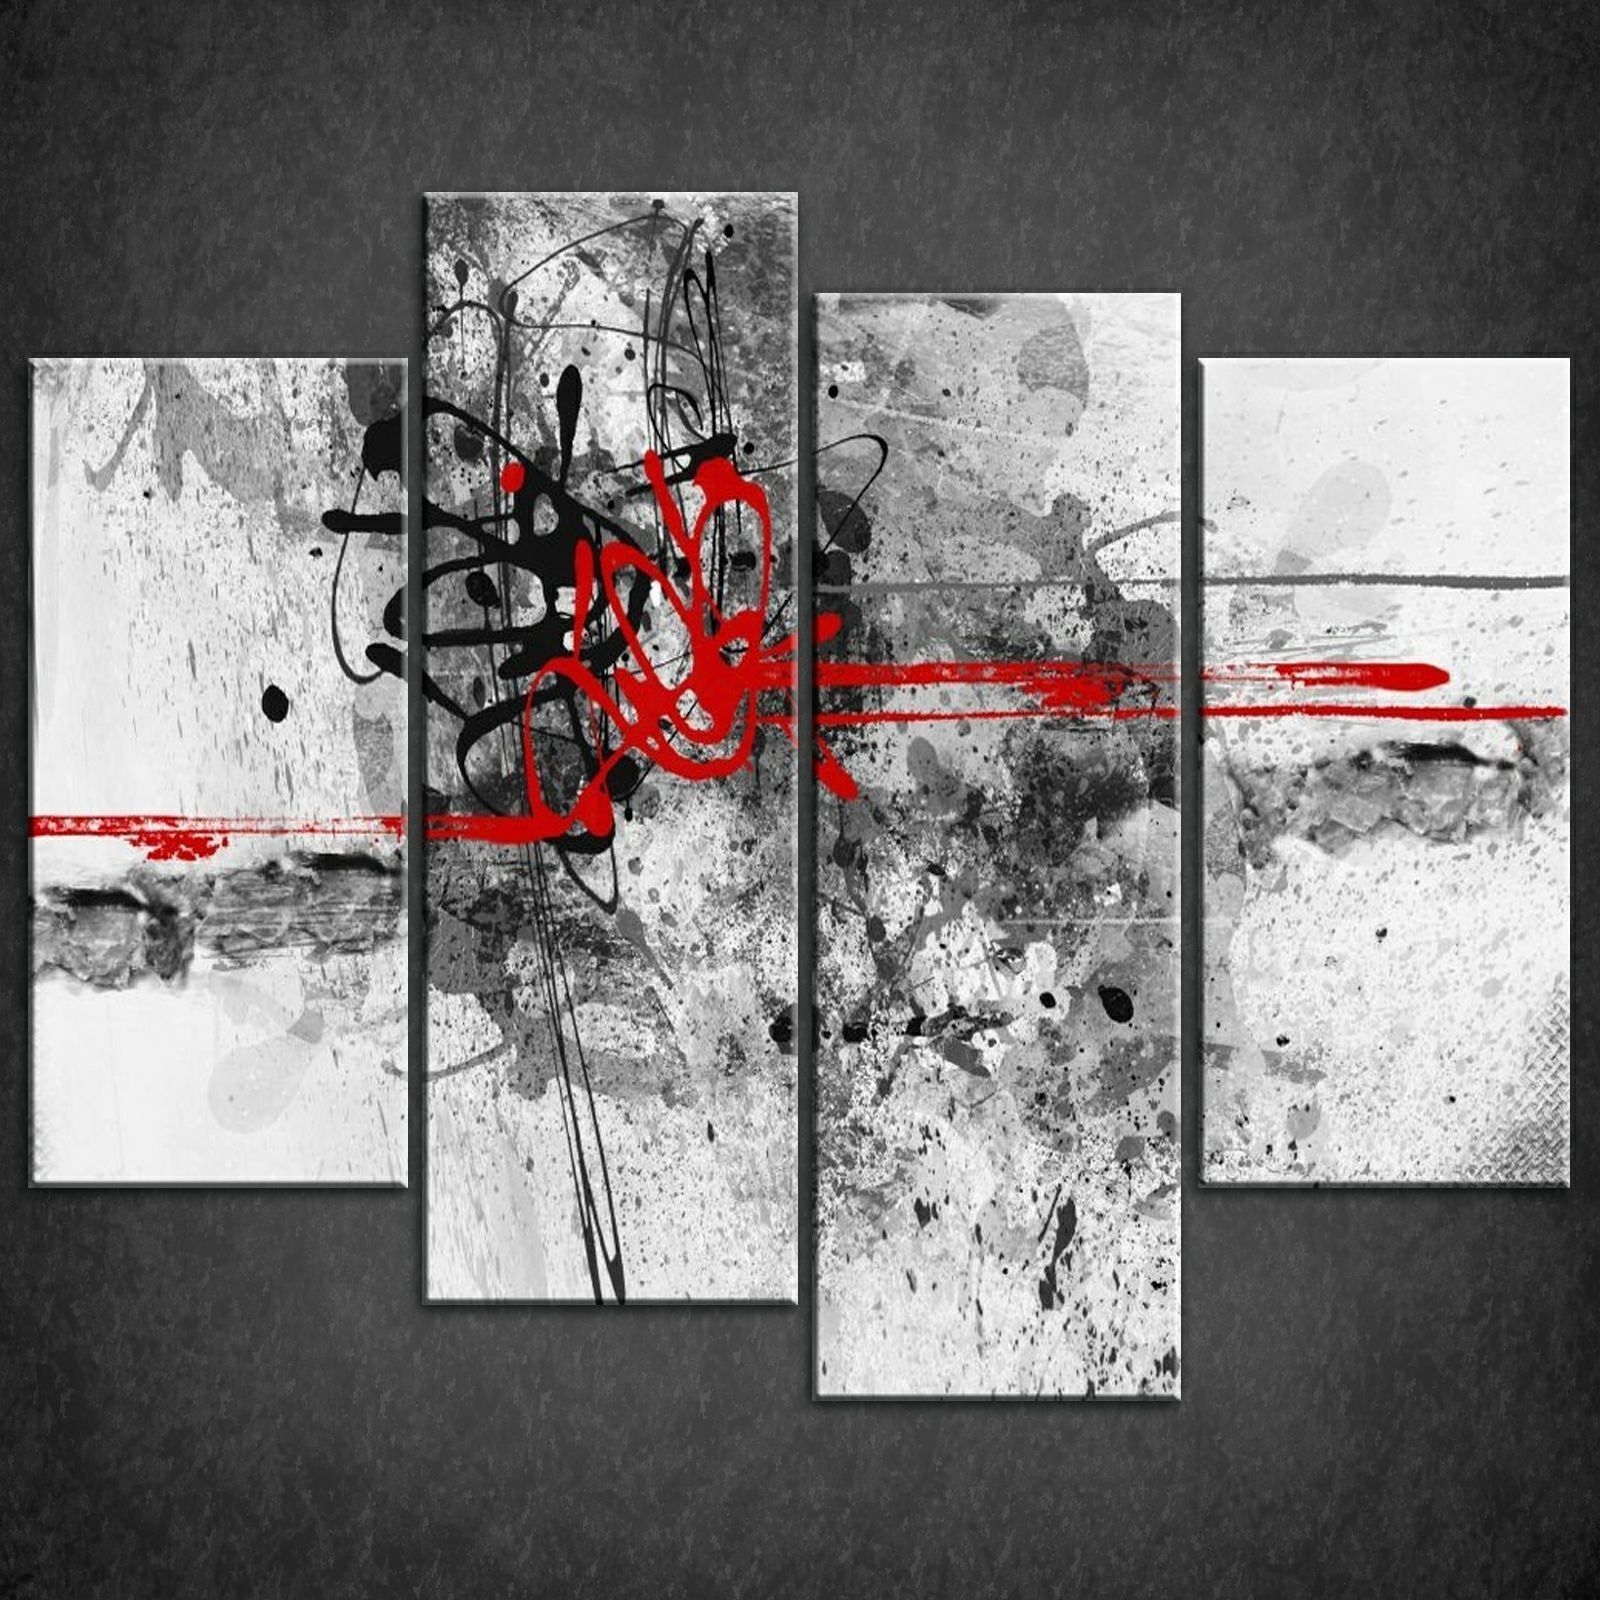 Widely Used Decor: Abstract Red Lines Split Canvas Wall Art Pictures Prints In Canvas Wall Art In Red (View 12 of 15)